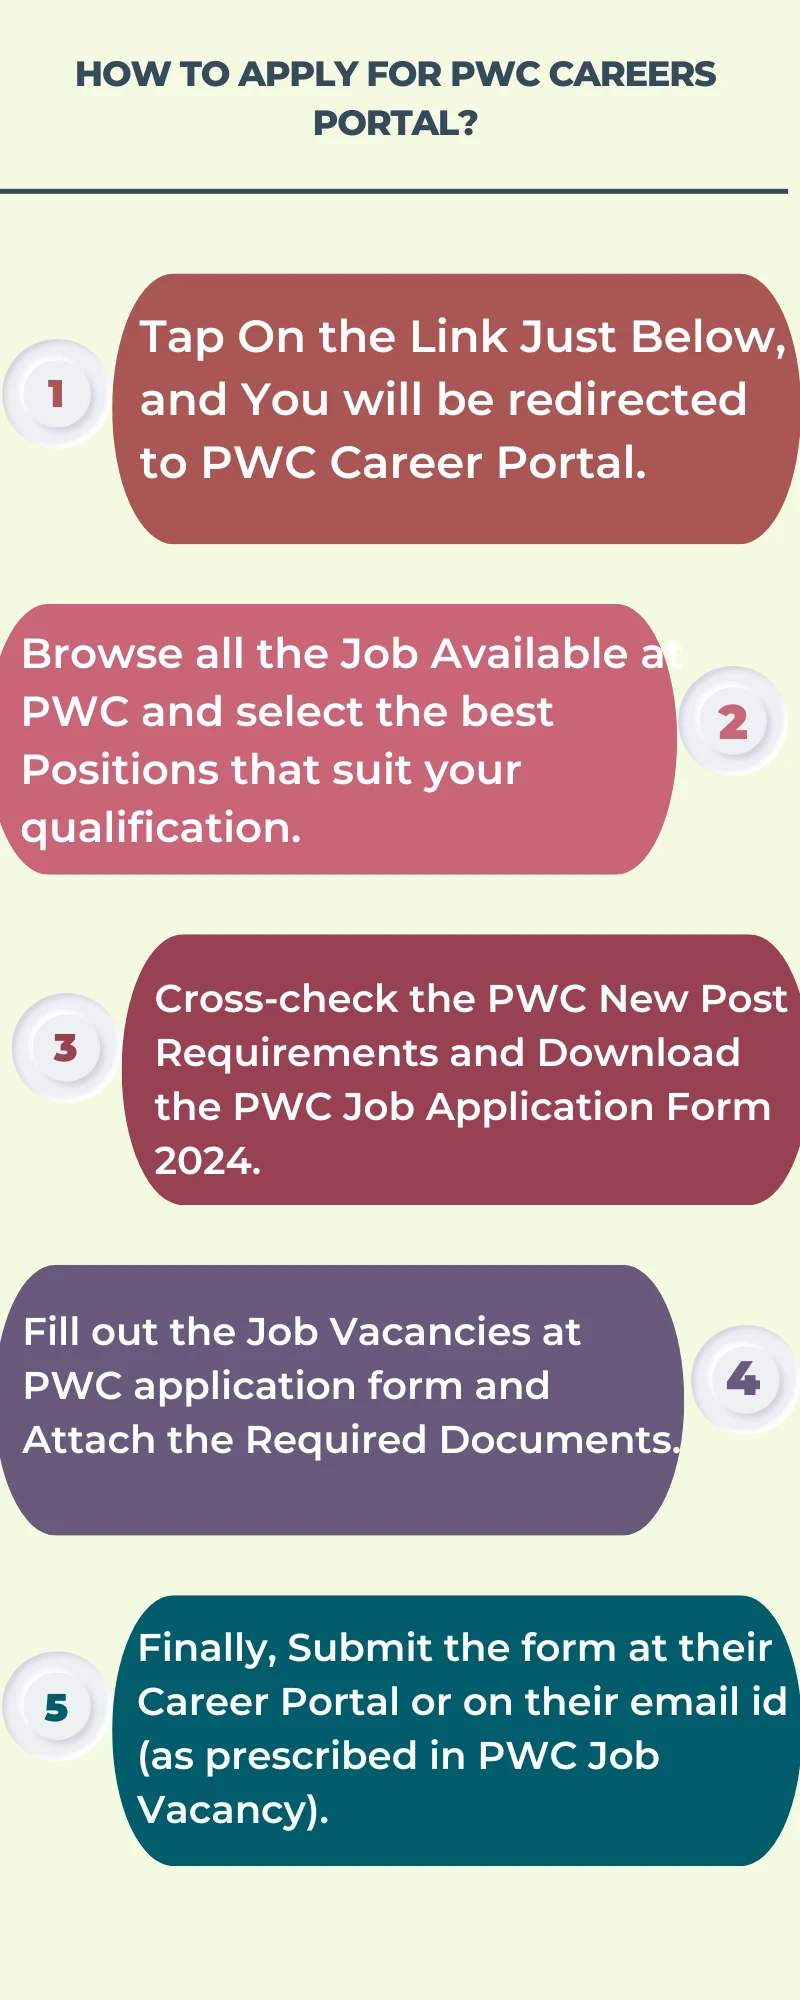 How To Apply for PWC Careers Portal?